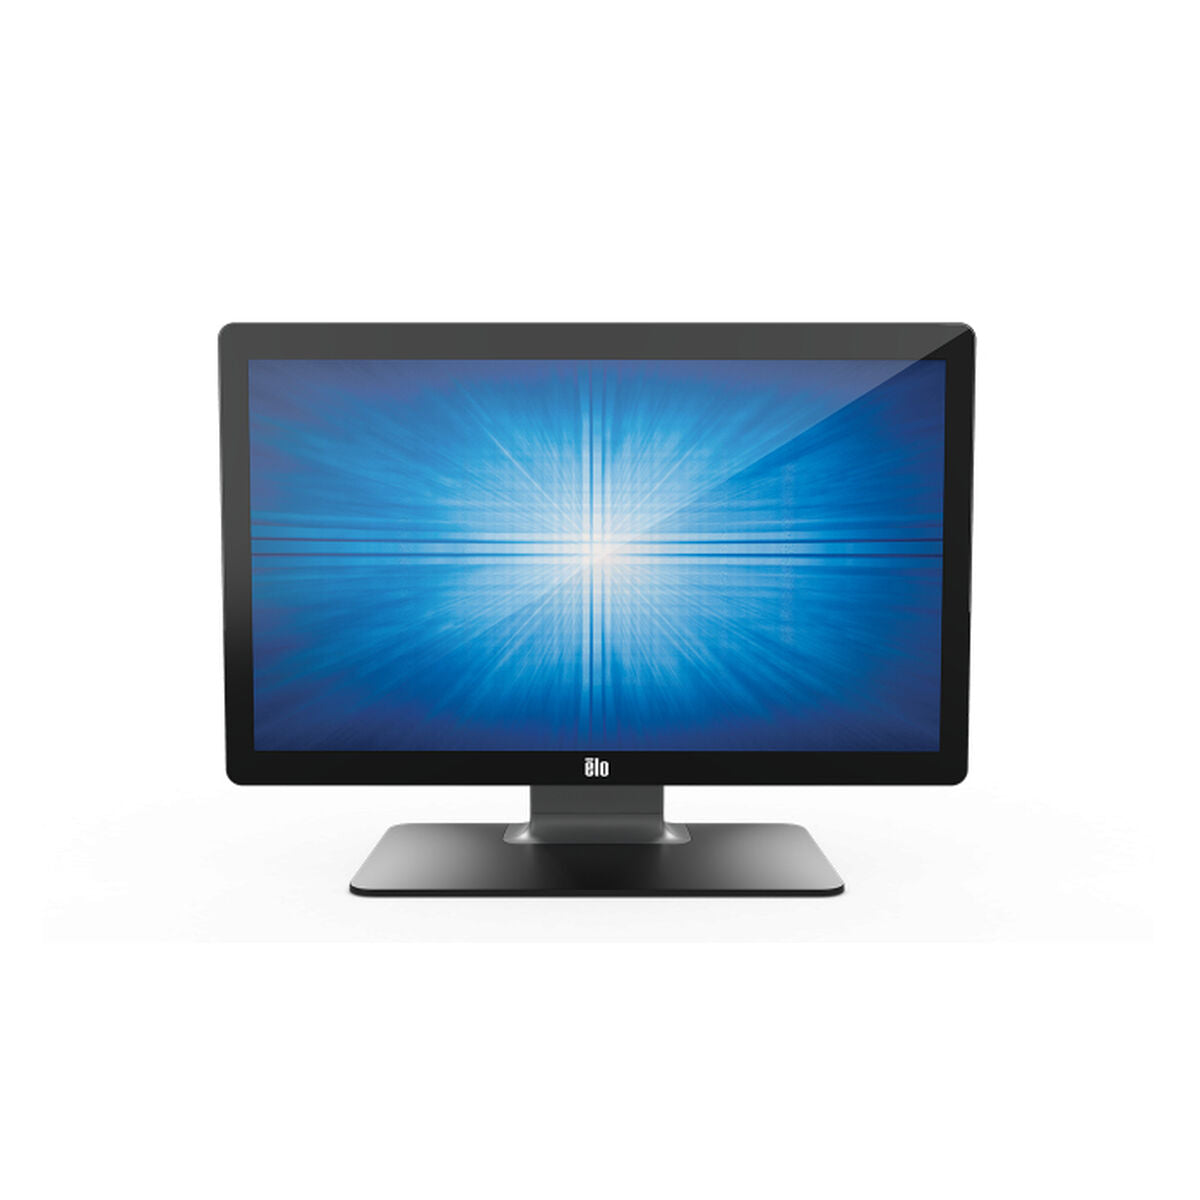 Monitor Elo Touch Systems E351806 23,8" 60 Hz 50-60 Hz, Elo Touch Systems, Computing, monitor-elo-touch-systems-e351806-23-8-tft-lcd-60-hz-50-60-hz, Brand_Elo Touch Systems, category-reference-2609, category-reference-2642, category-reference-2644, category-reference-t-19685, computers / peripherals, Condition_NEW, office, Price_600 - 700, Teleworking, RiotNook